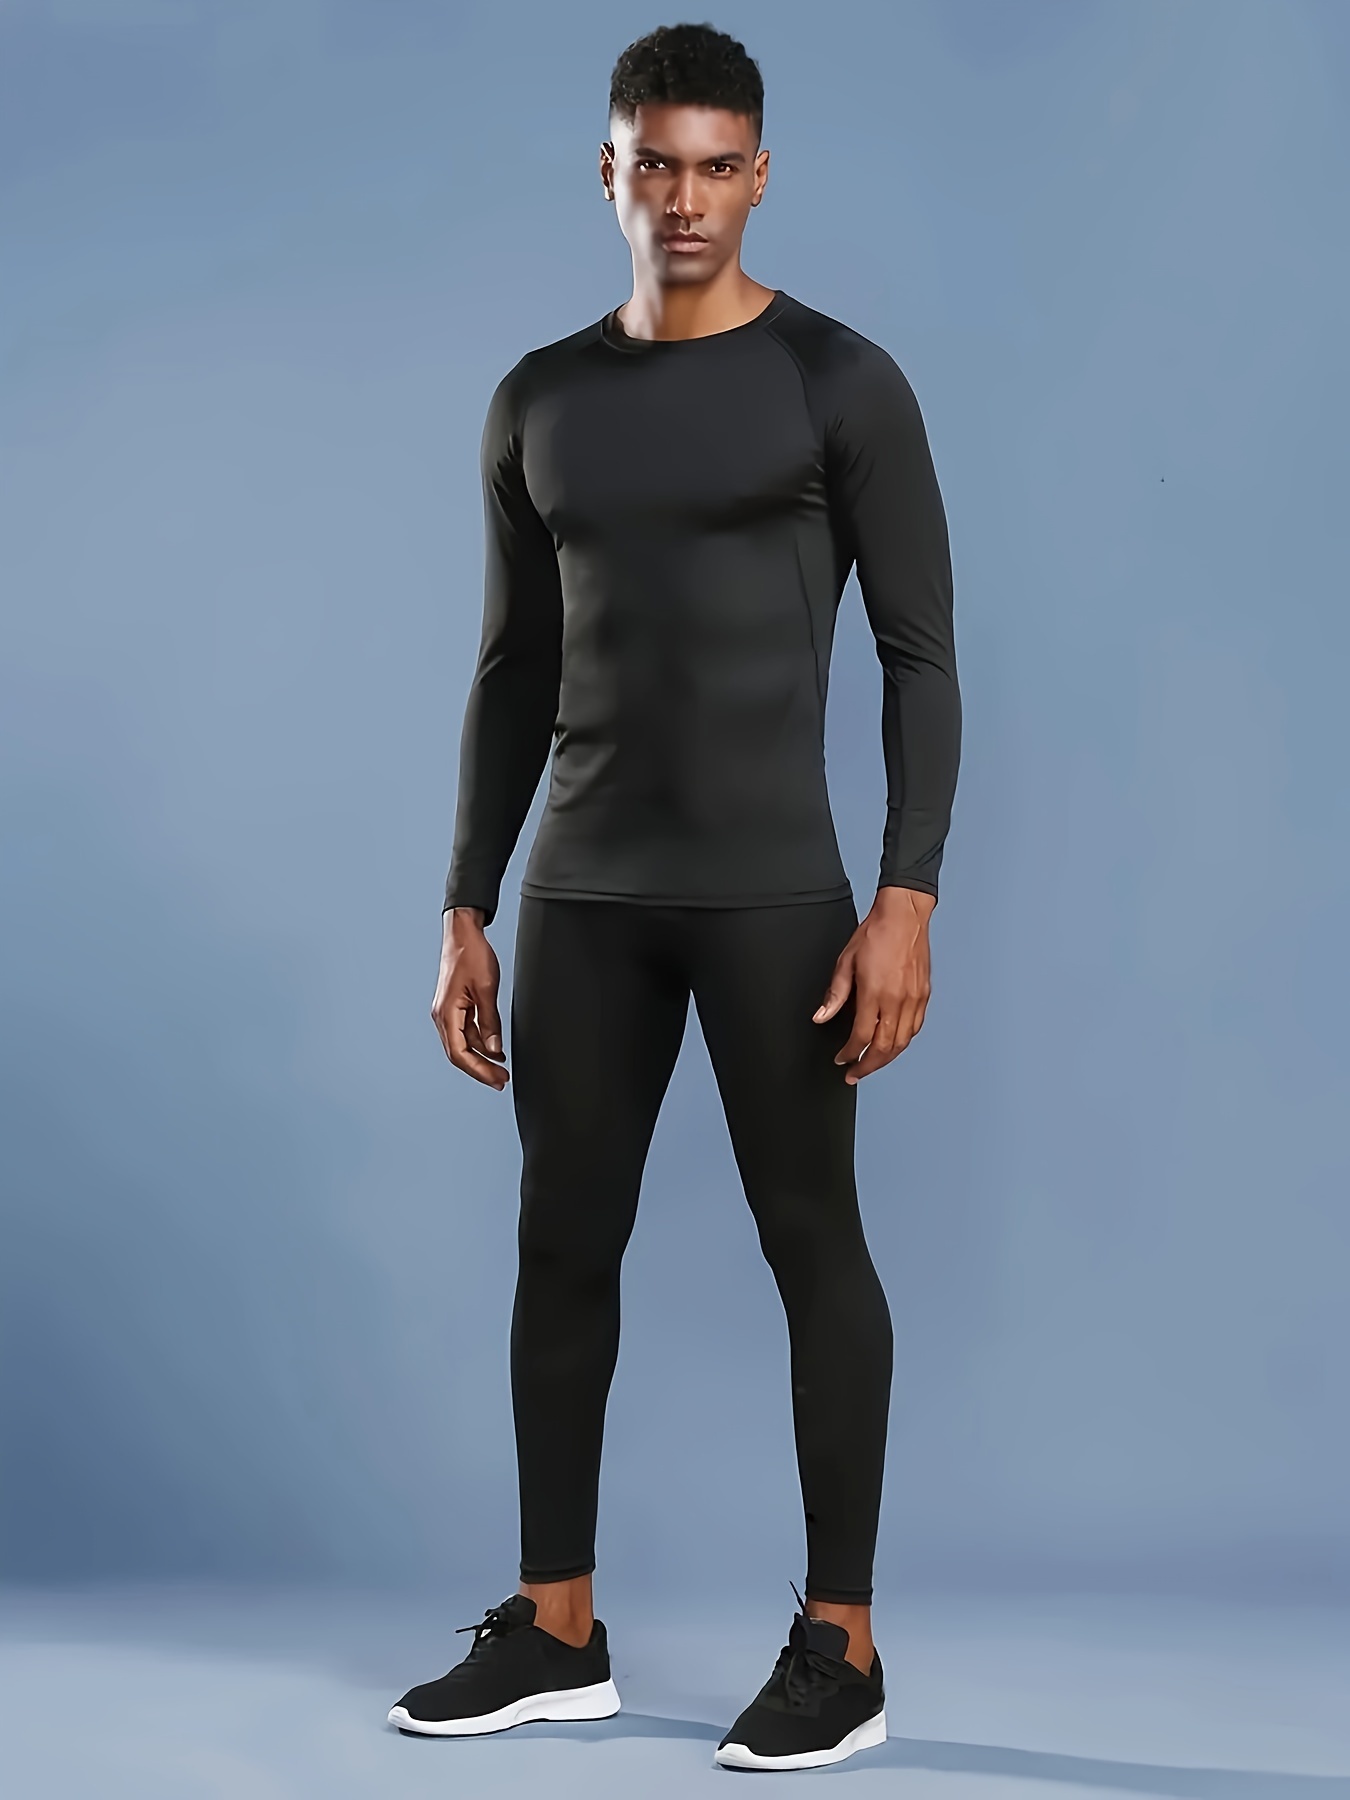 Men's Thermal Compression Pants Athletic Sports Leggings Running